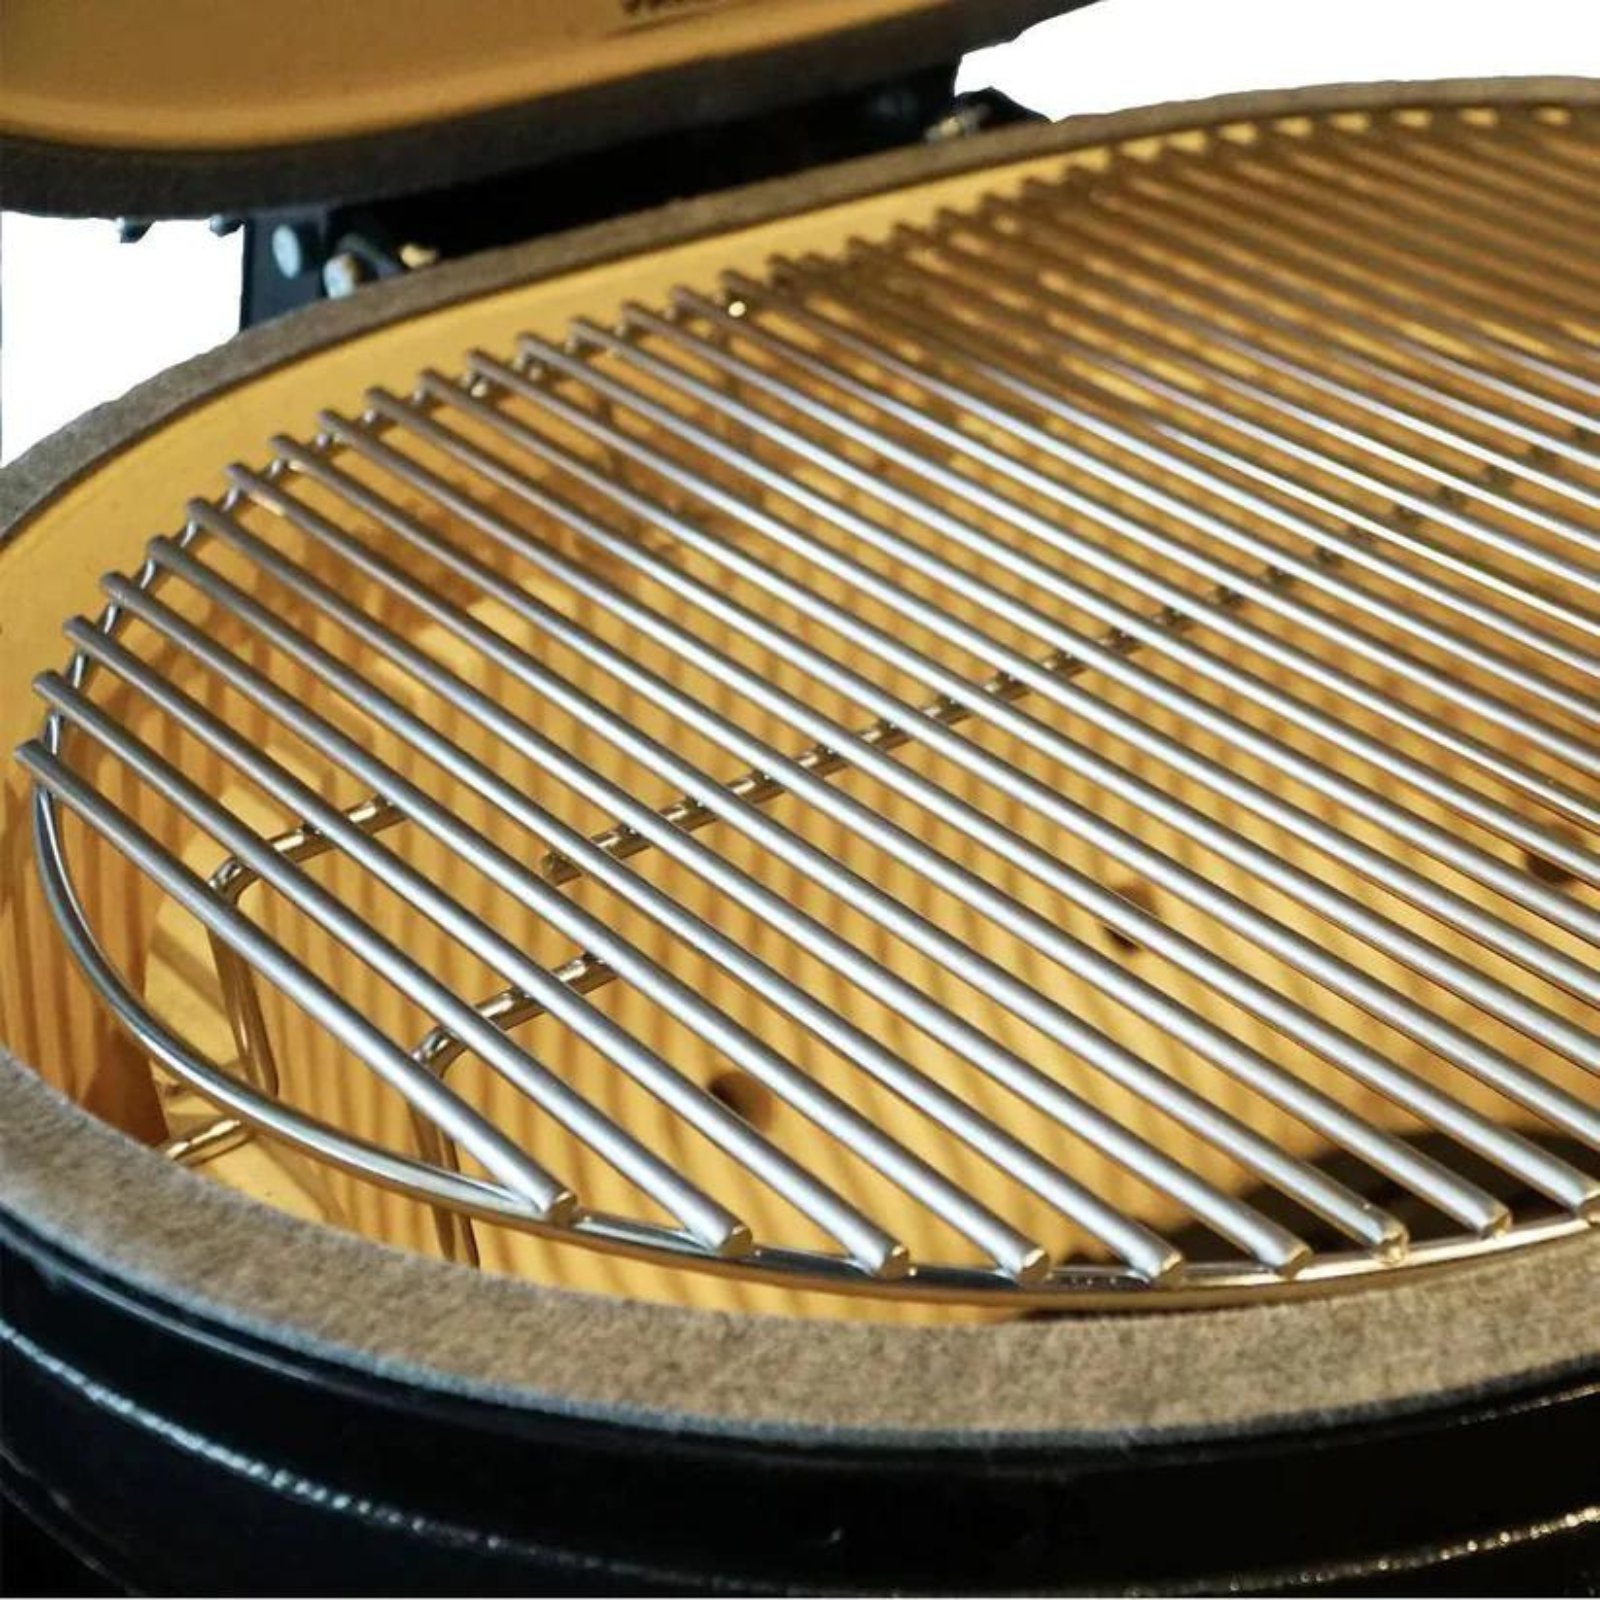 Primo Oval Large Charcoal Grill - PGCLGHG